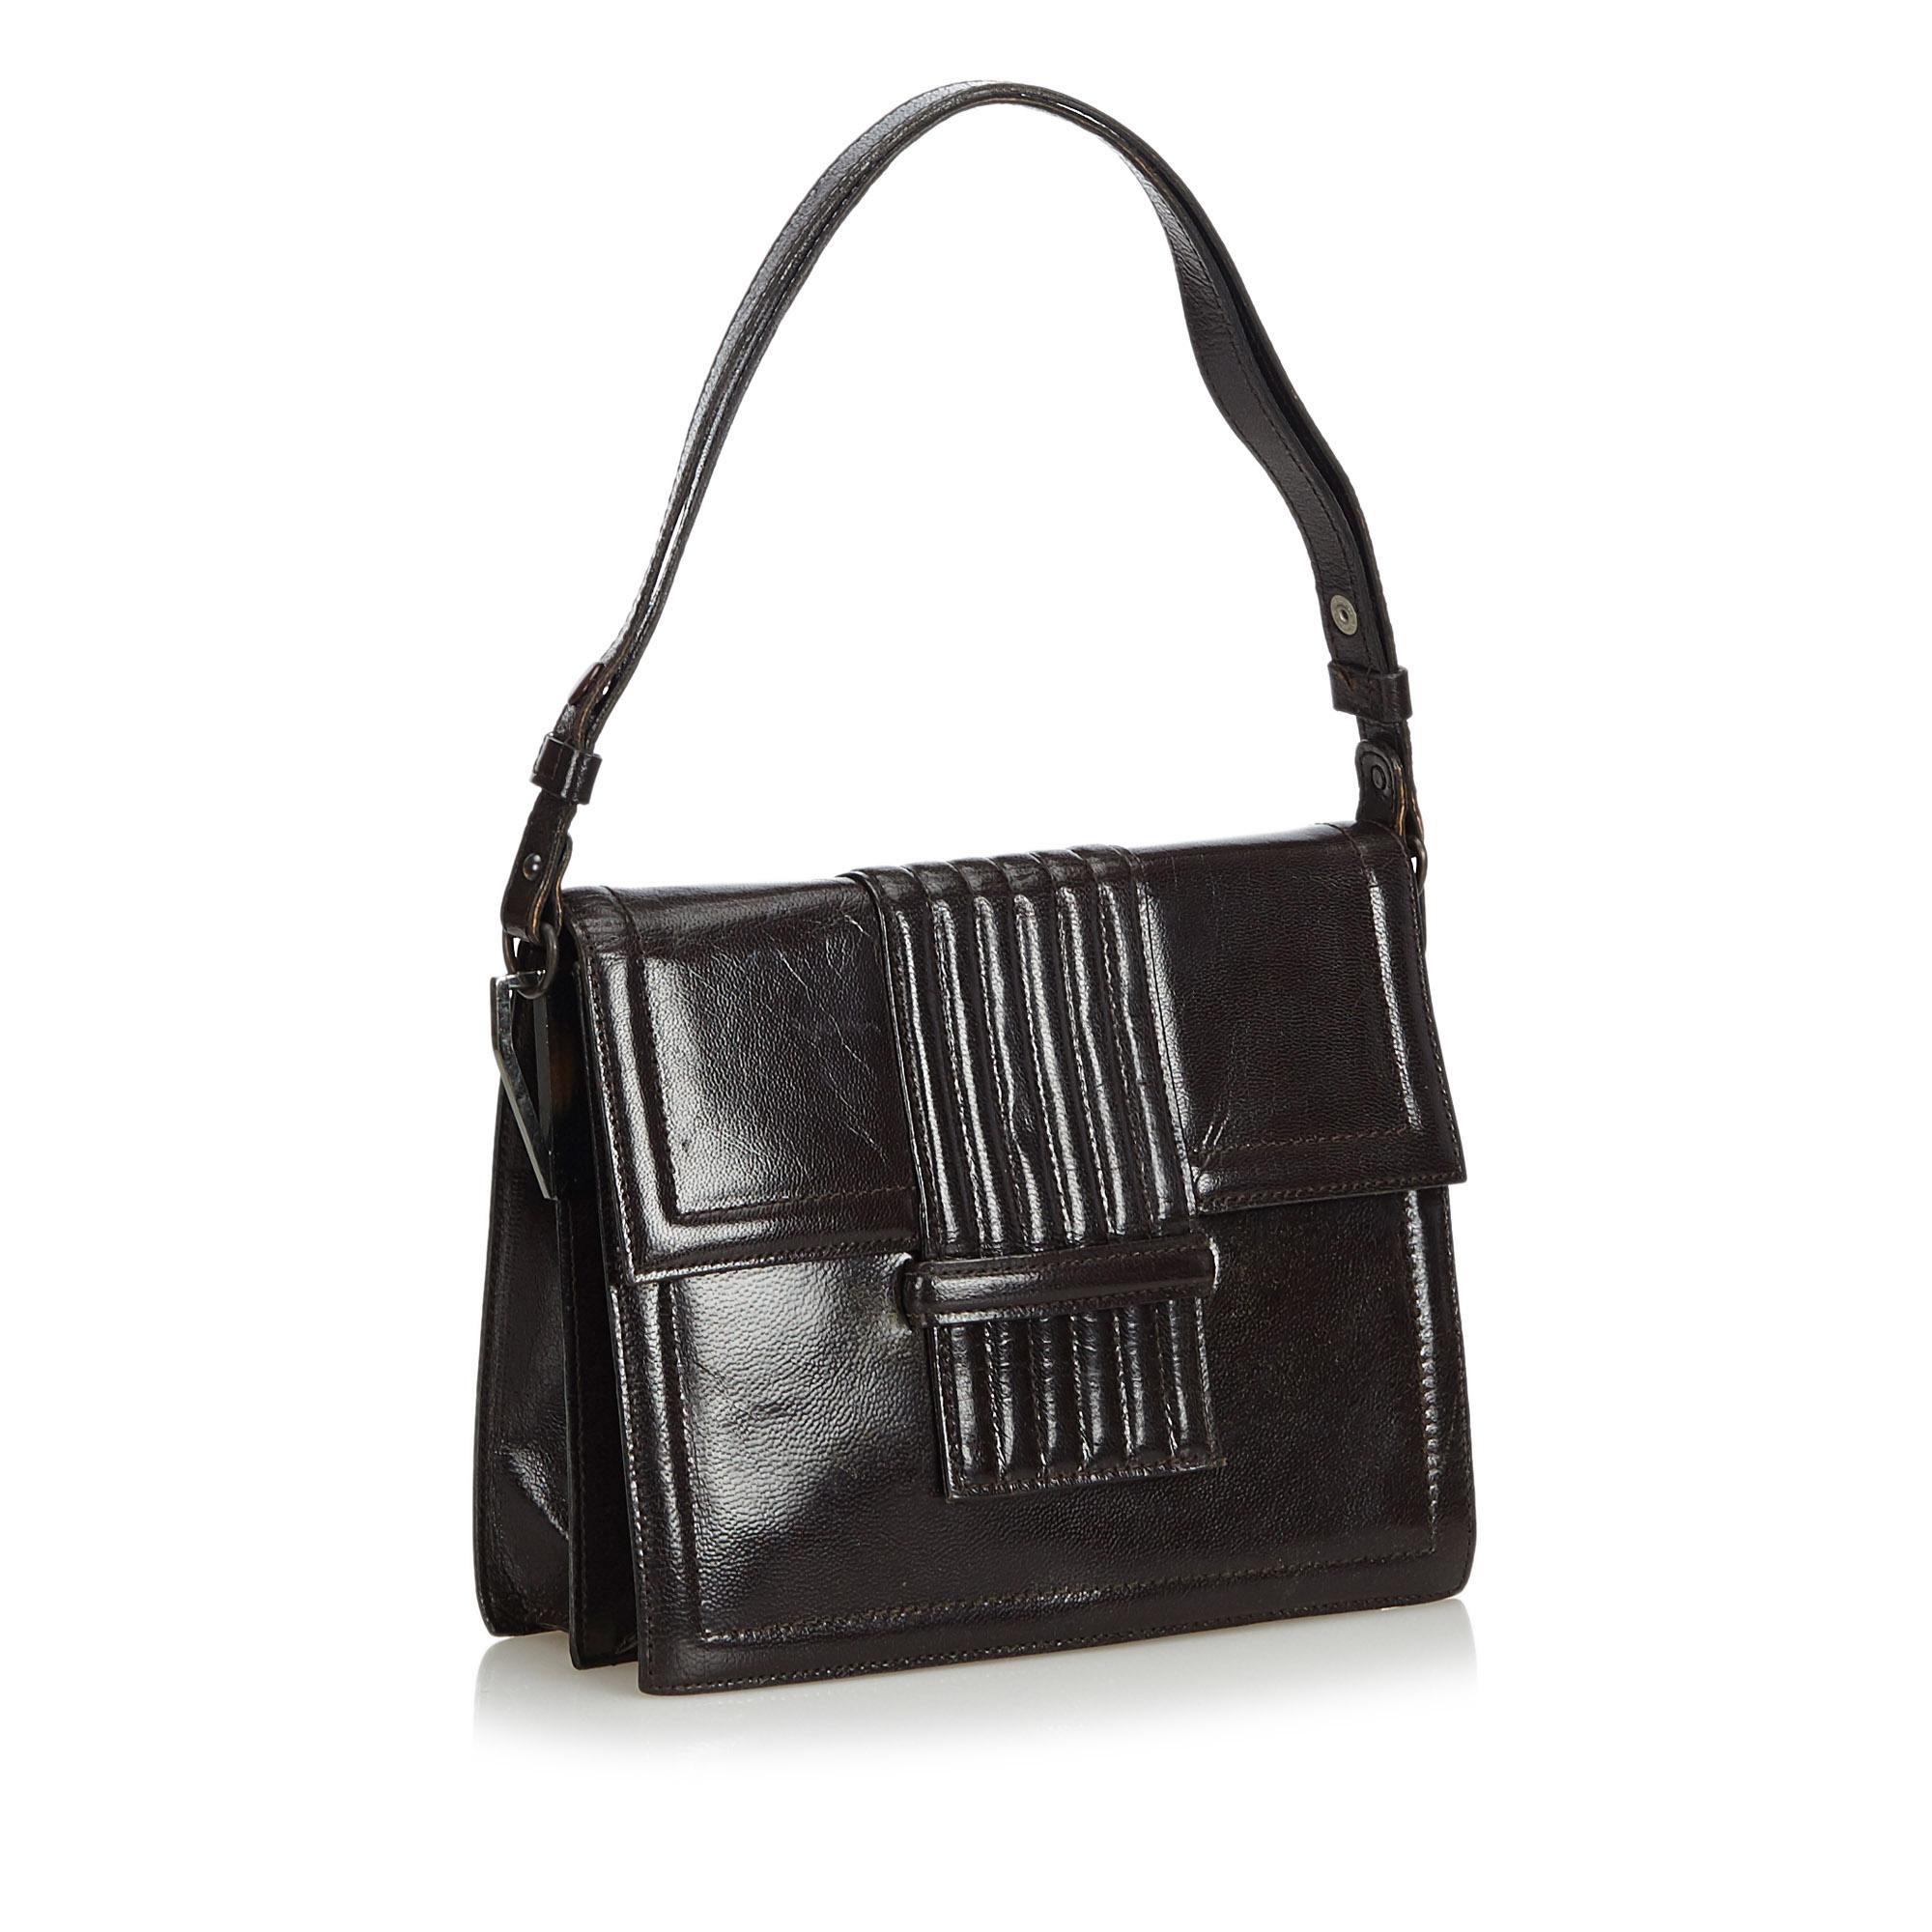 This shoulder bag features a leather body, a flat strap, a front flap with a pull through closure, and interior zip and slip pockets. It carries as B condition rating.

Inclusions: 
This item does not come with inclusions.

Dimensions:
Length: 19.00